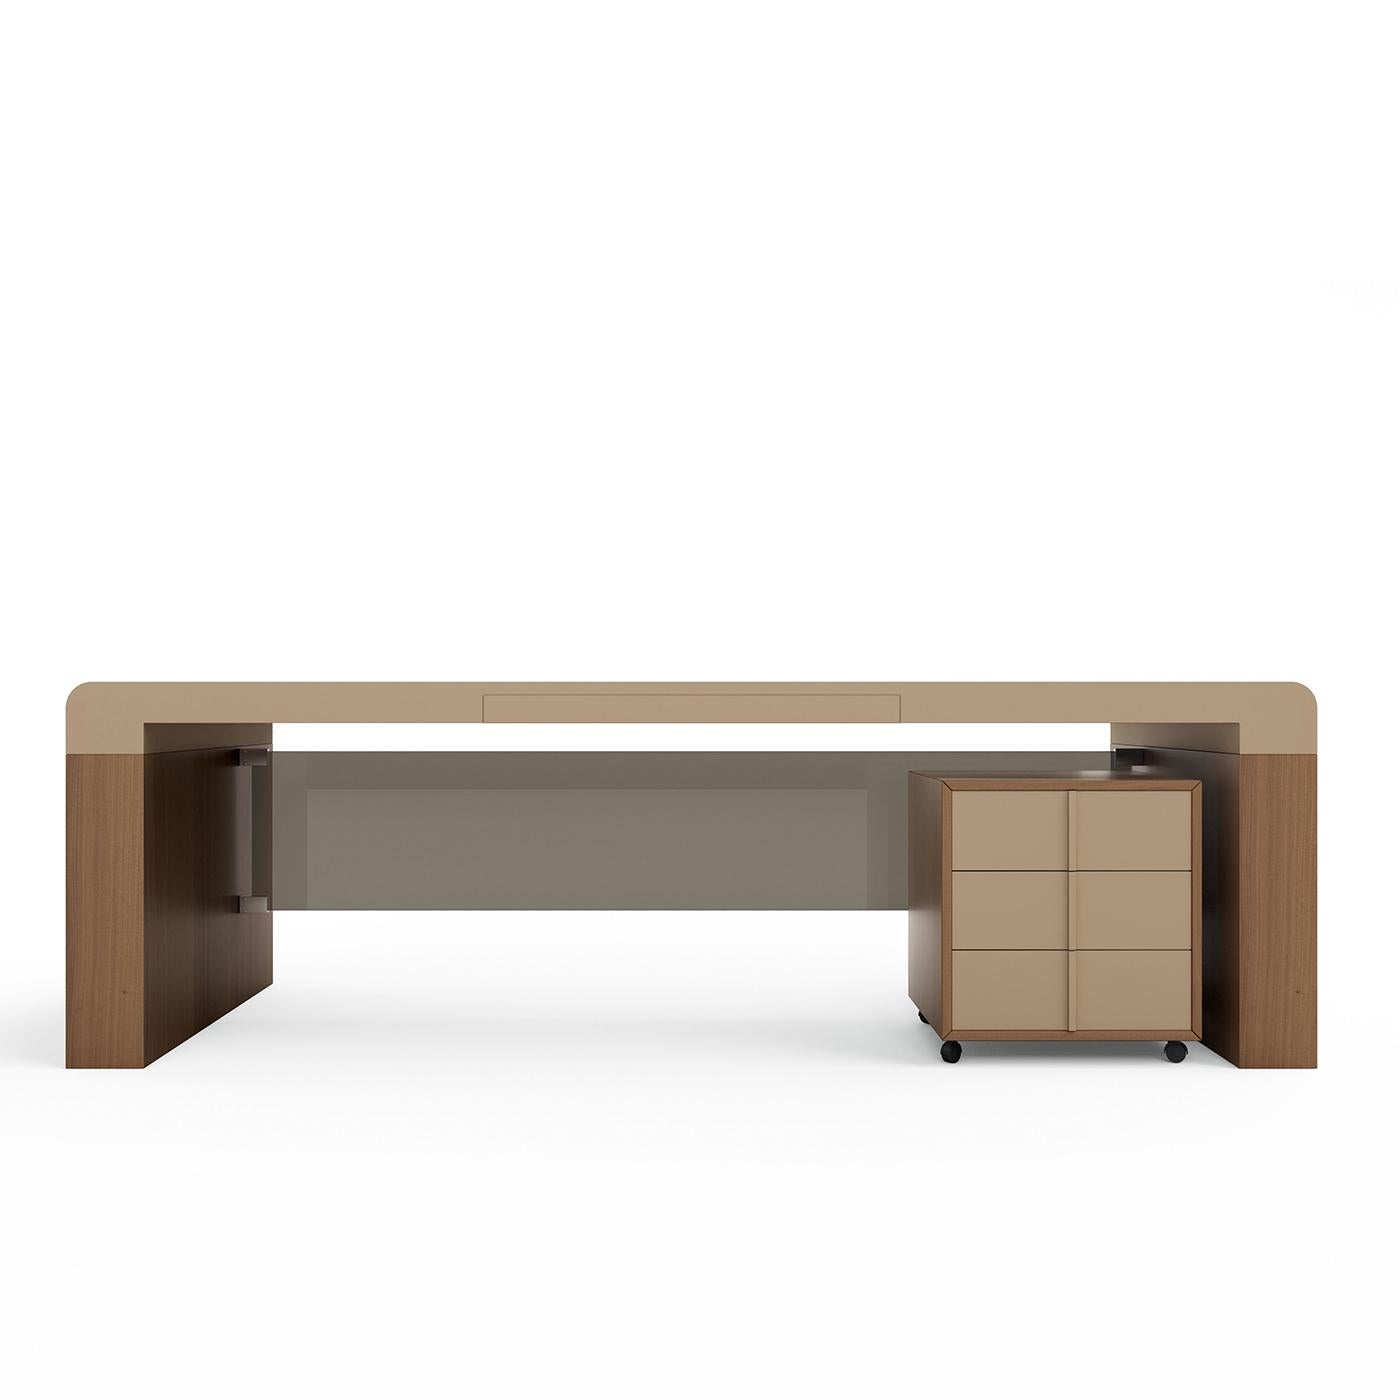 Designed for presidential offices, this desk's large scale conveys a sense of importance. The soft lines of its rope-colored leather desktop contrast the sharp edges of its dark canaletto-walnut legs, making it extremely modern, sophisticated and